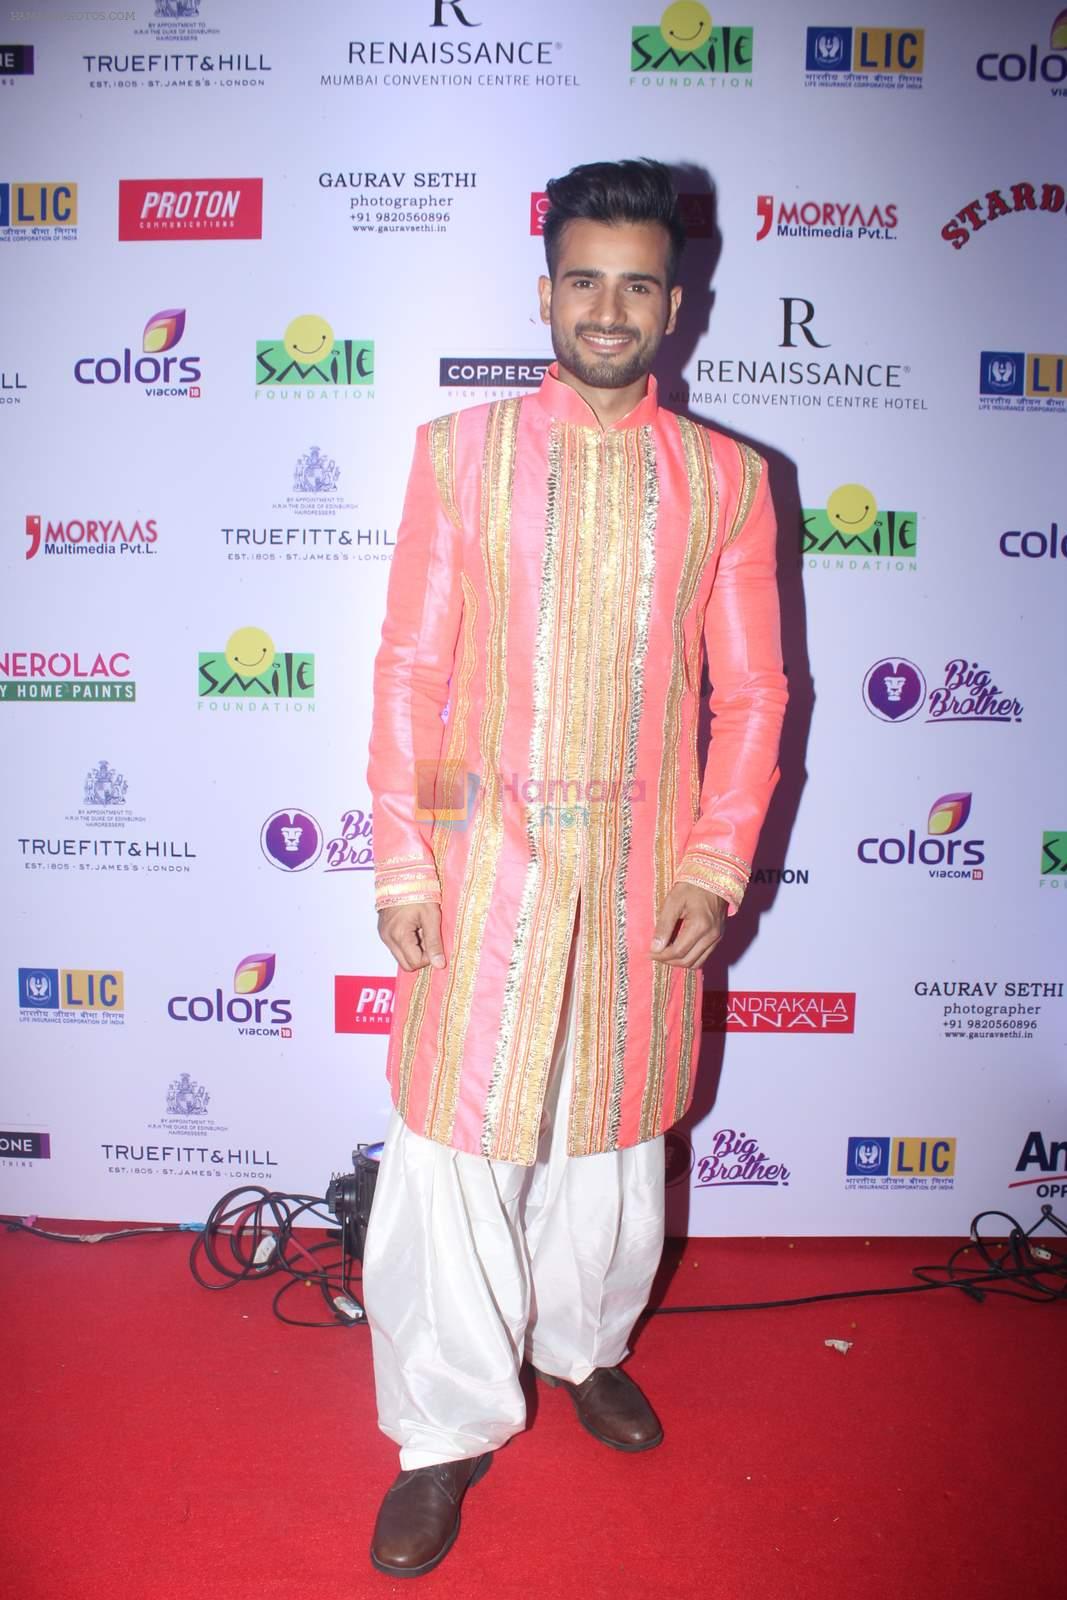 Karan Tacker at Smile Foundation show with True Fitt & Hill styling in Rennaisance on 15th March 2015